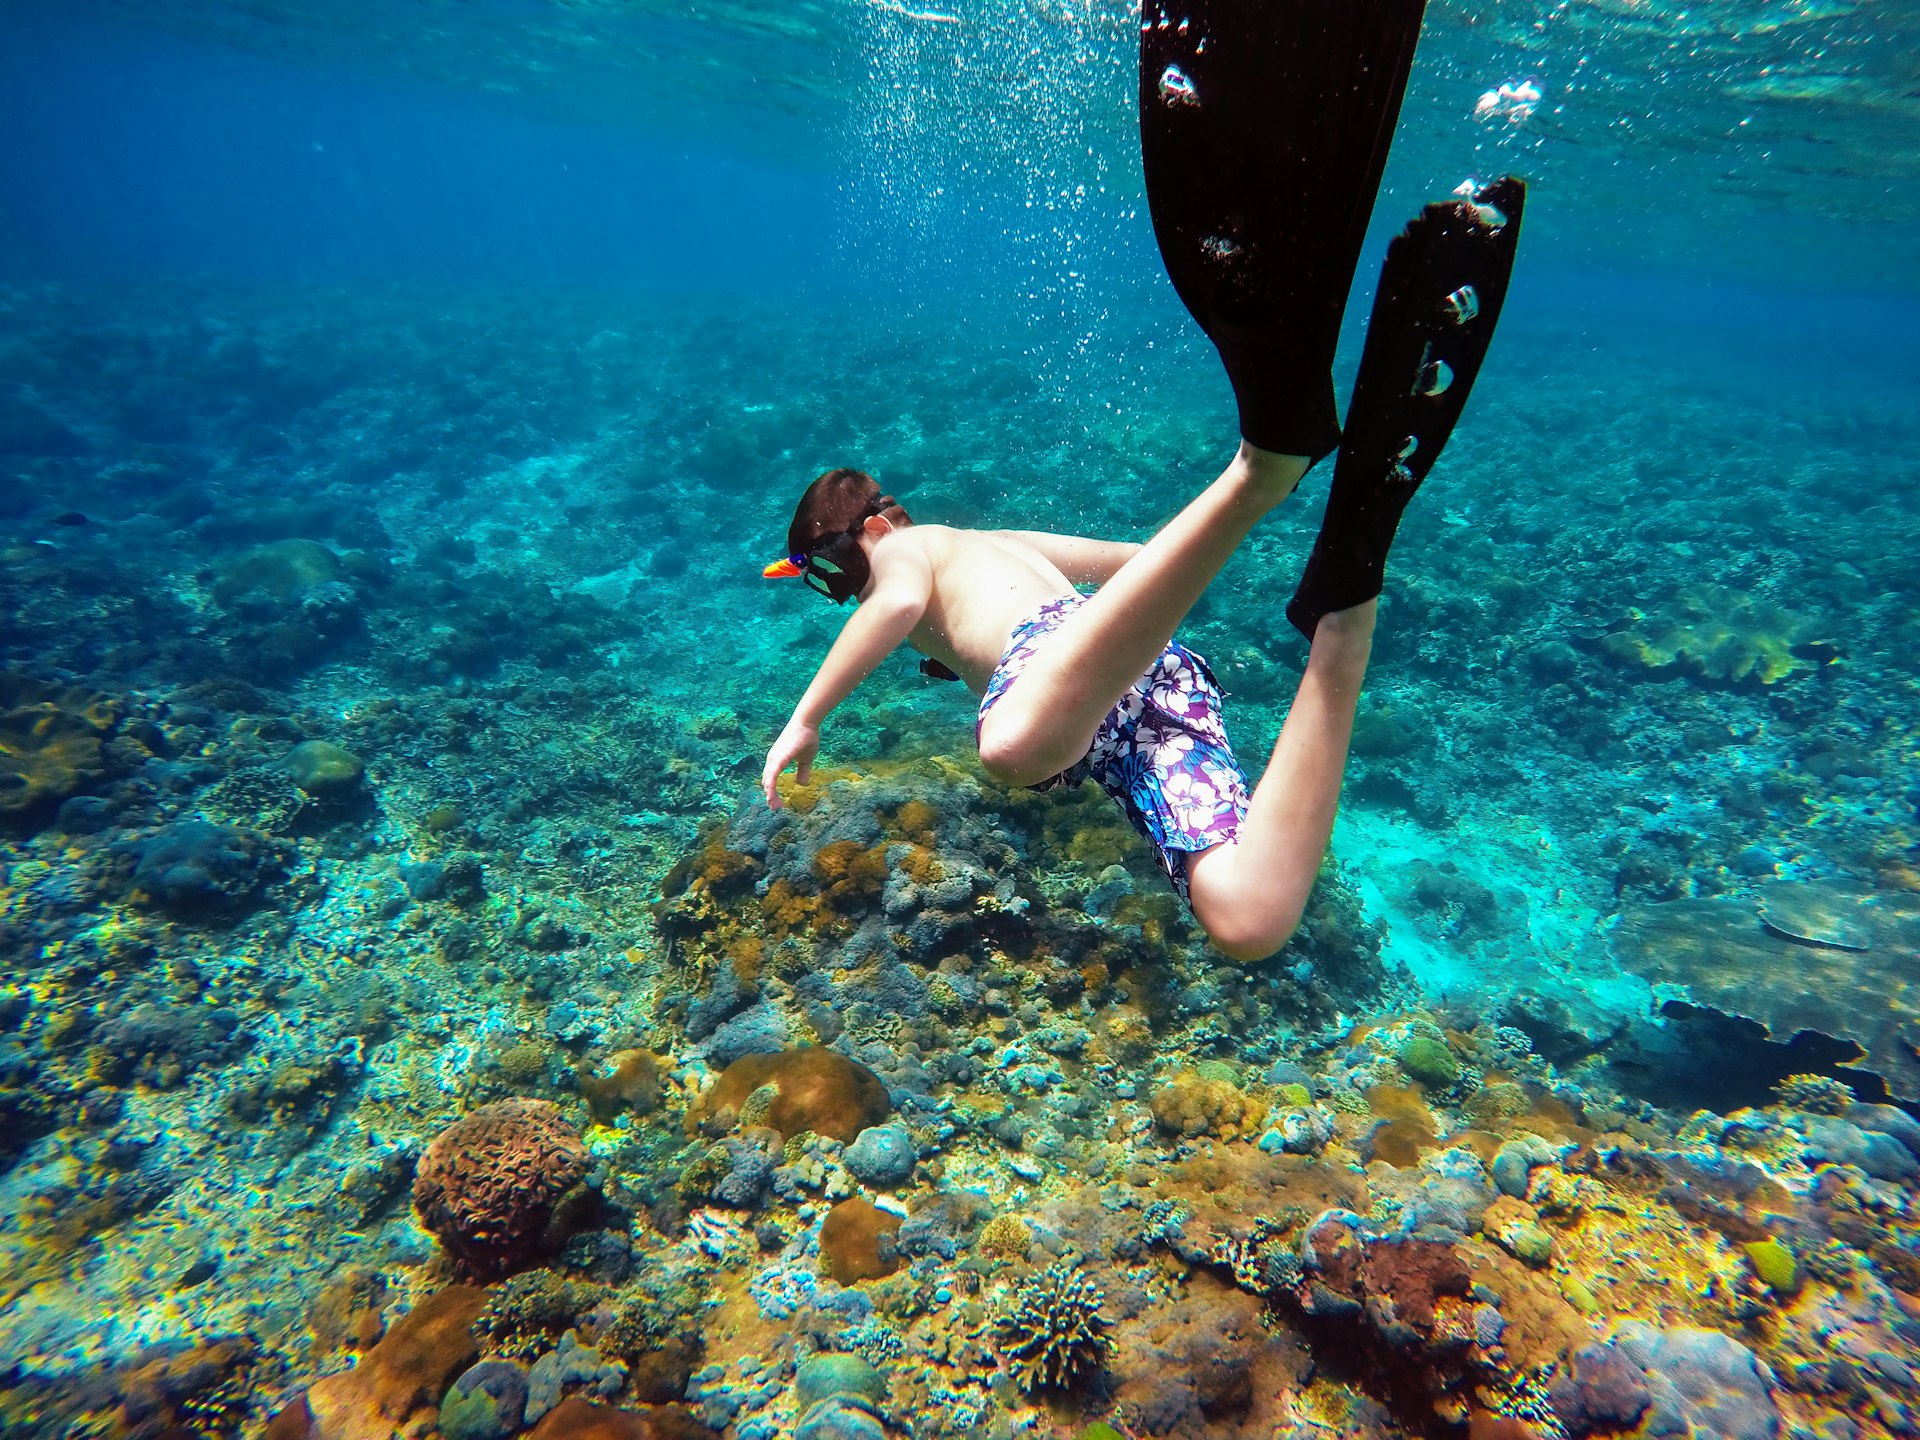 Underwater shoot of a young boy snorkeling on reefs off Nusa Penida